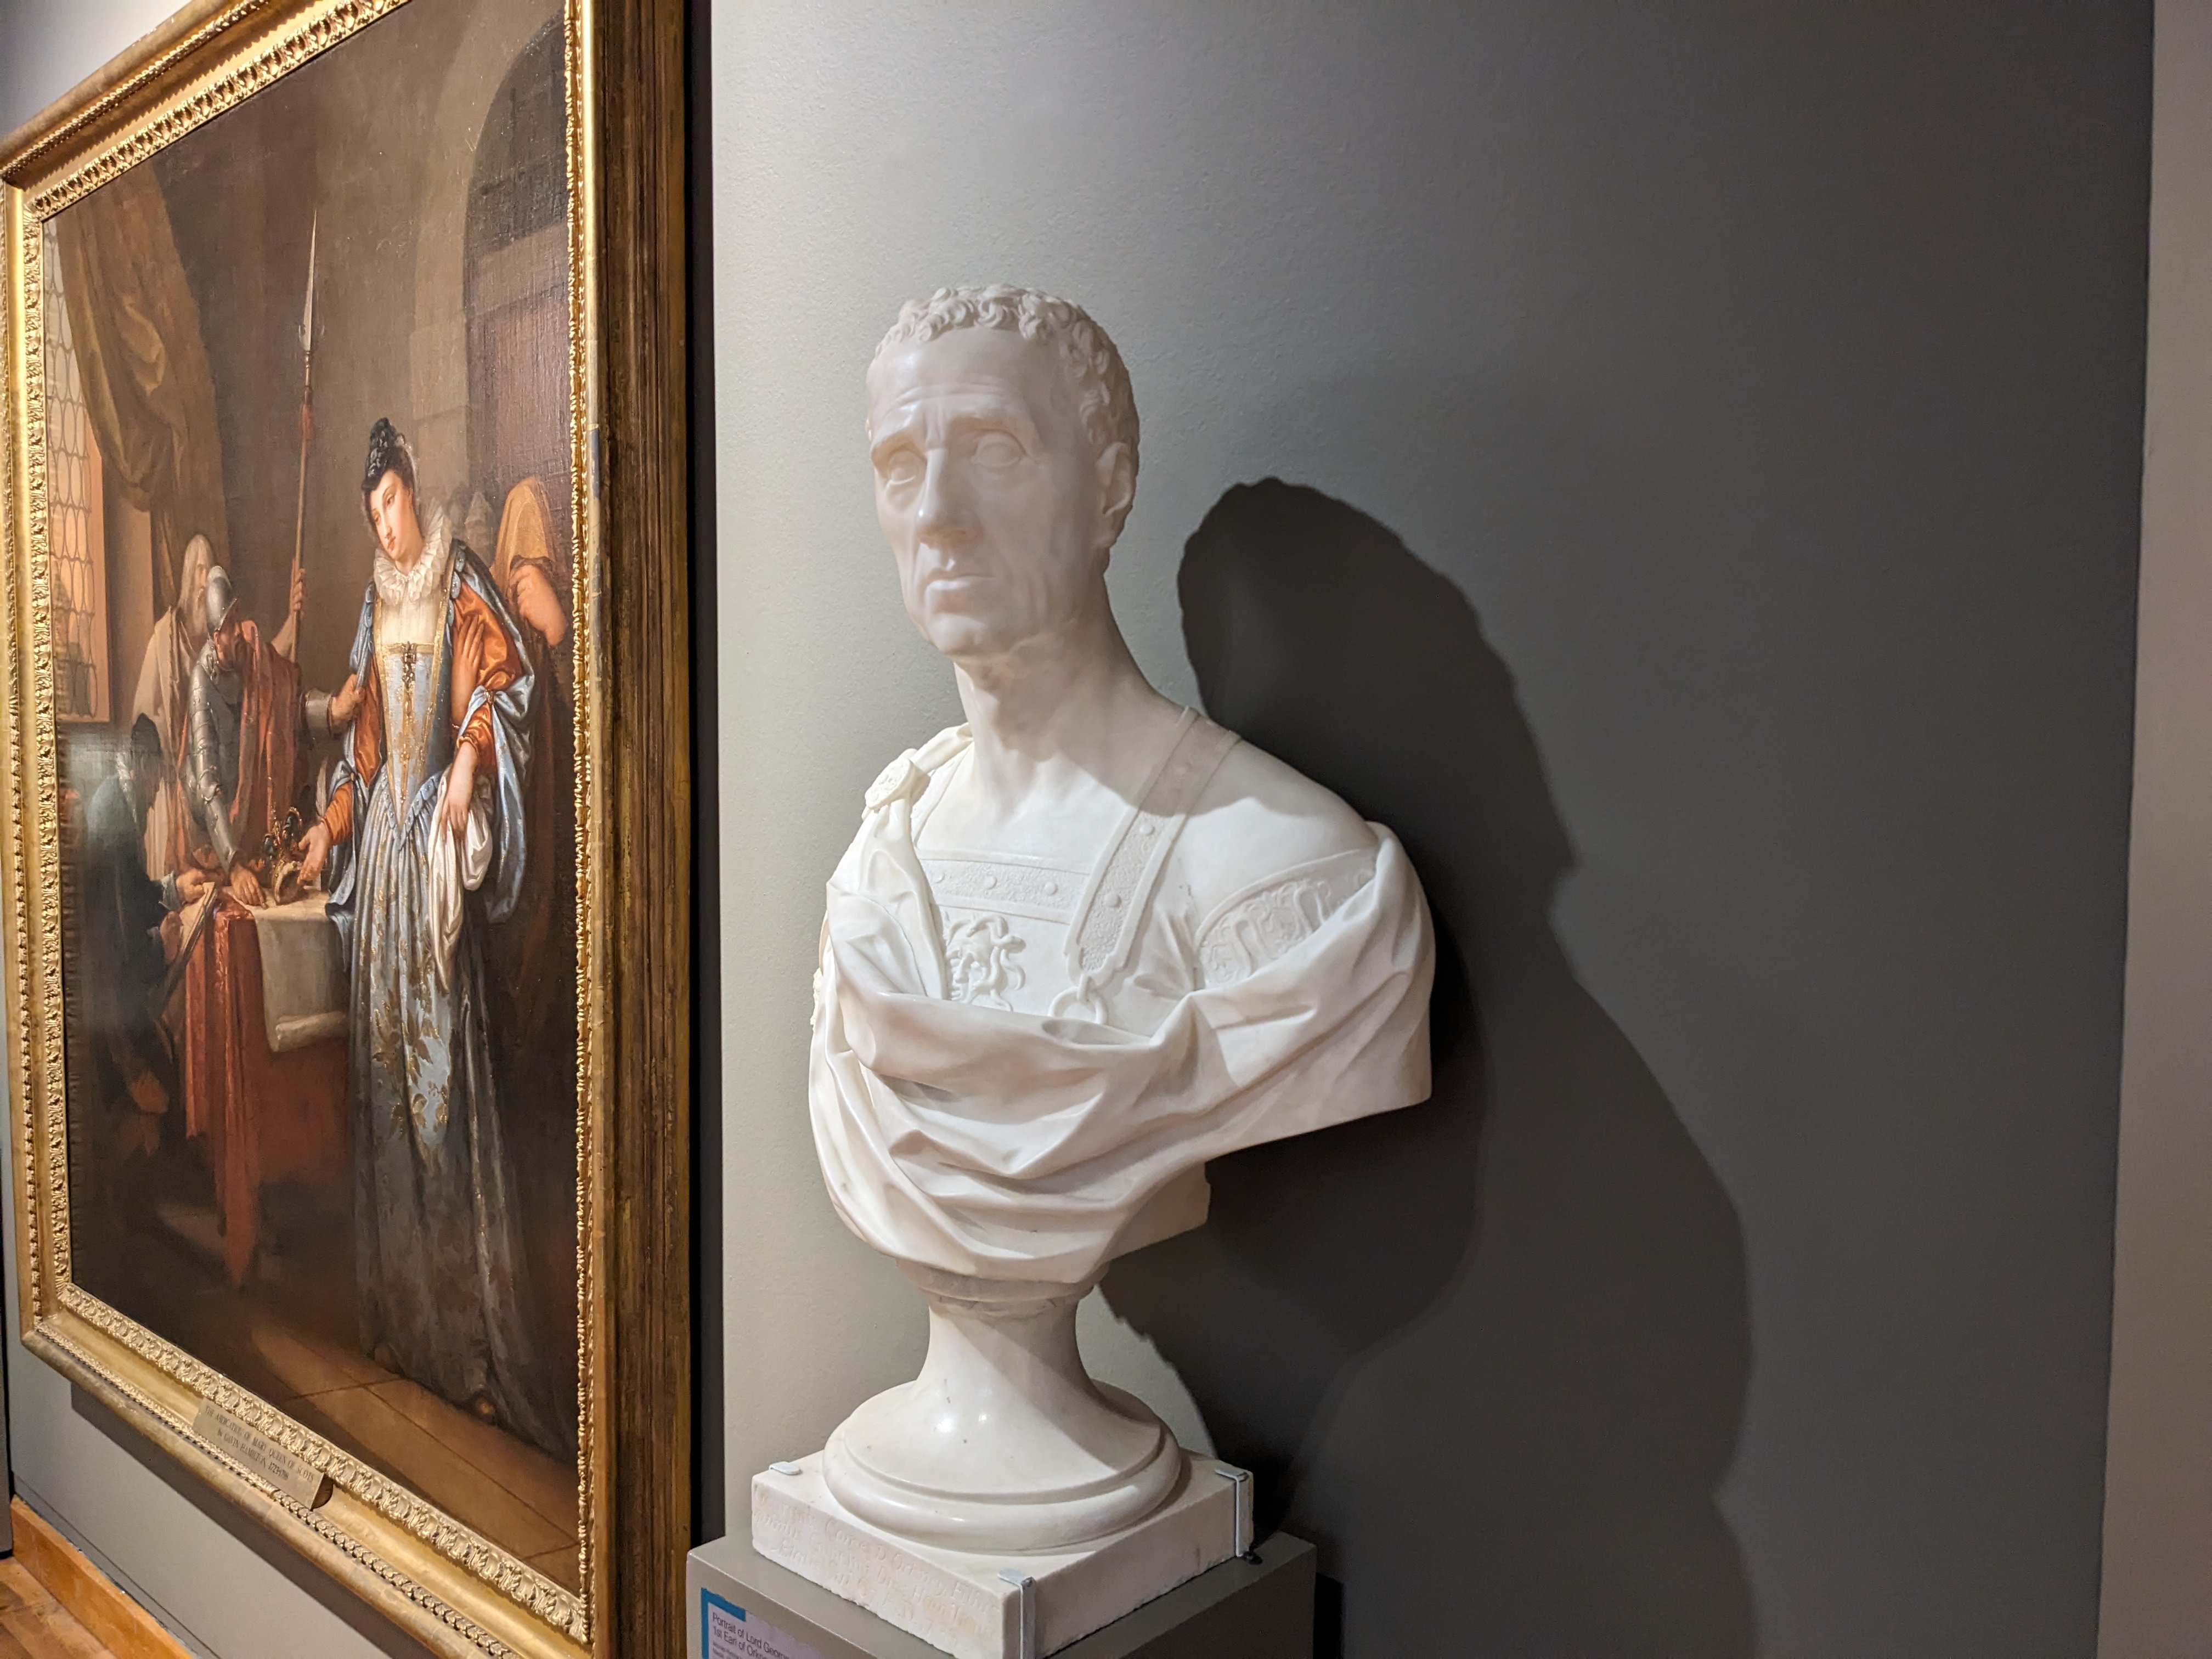 White marble bust of a man dressed in classical Roman attire. The sculpture is set against a grey background. A large painting is hung on the wall to the left of the sculpture.